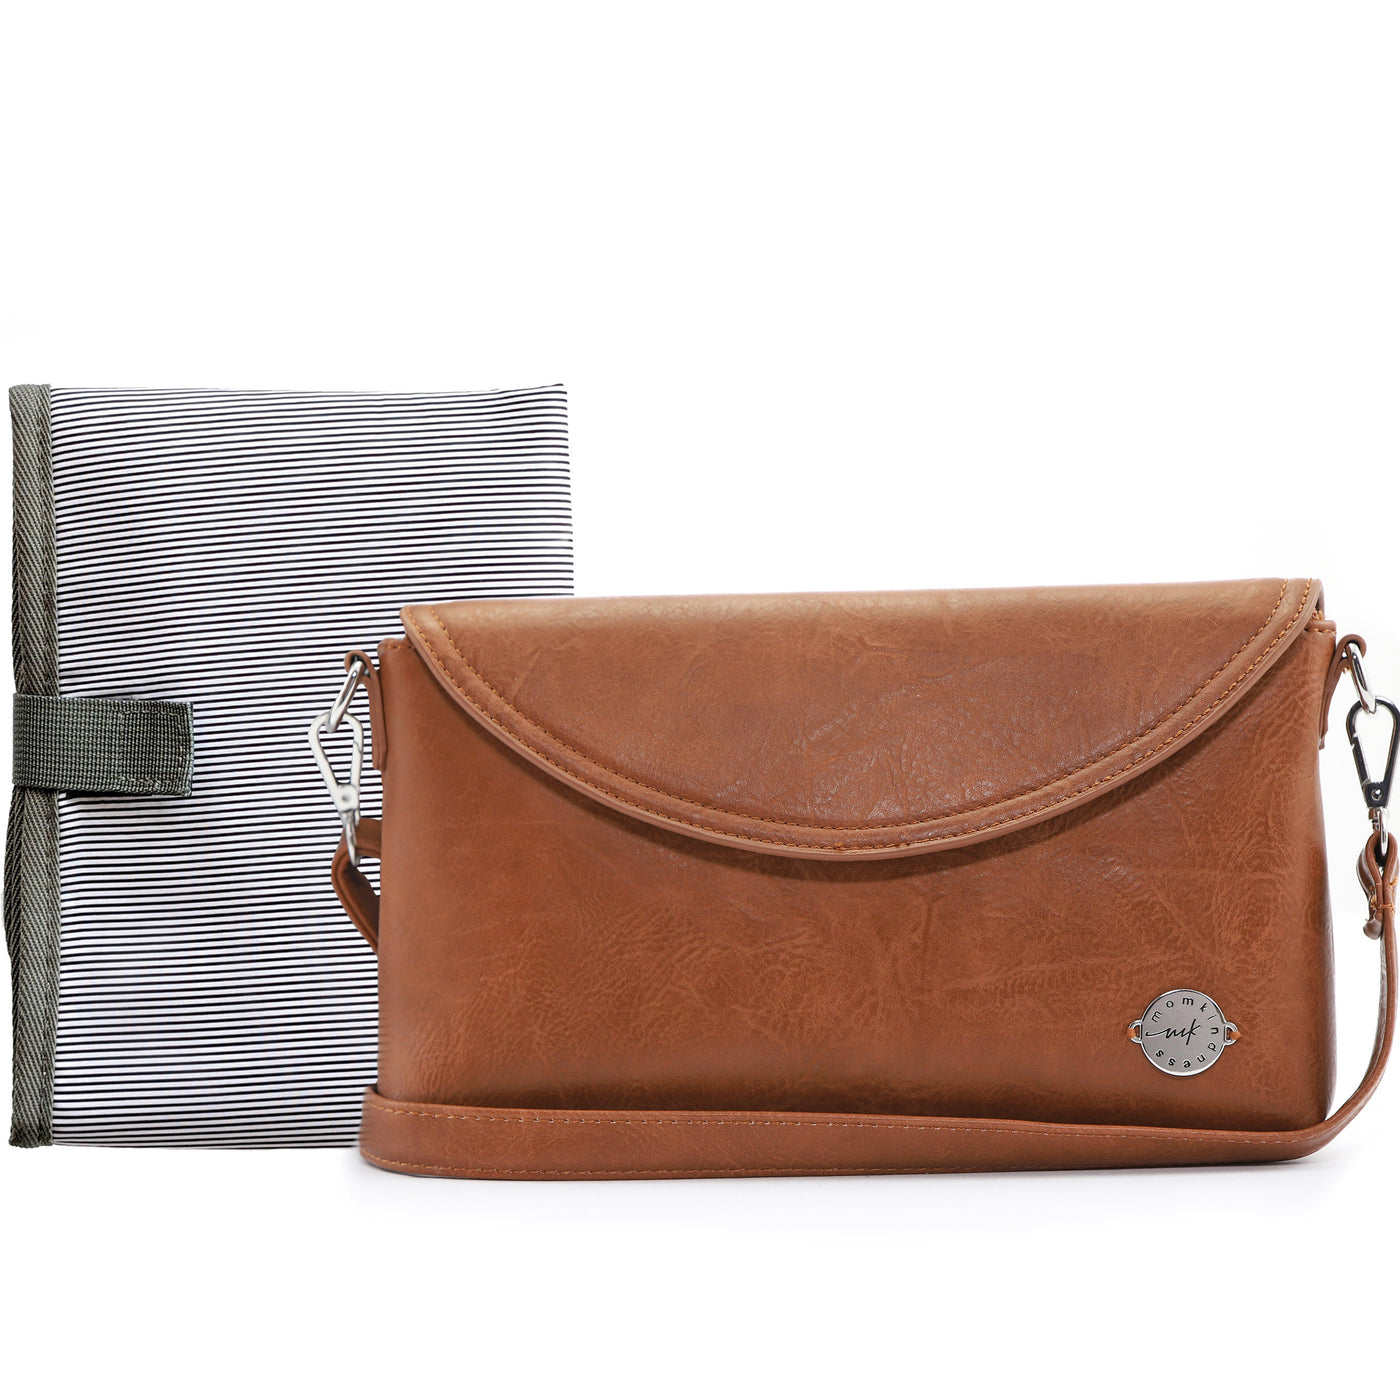 A caramel brown vegan leather crossbody clutch shown with a folded black & white striped changing mat on white background.